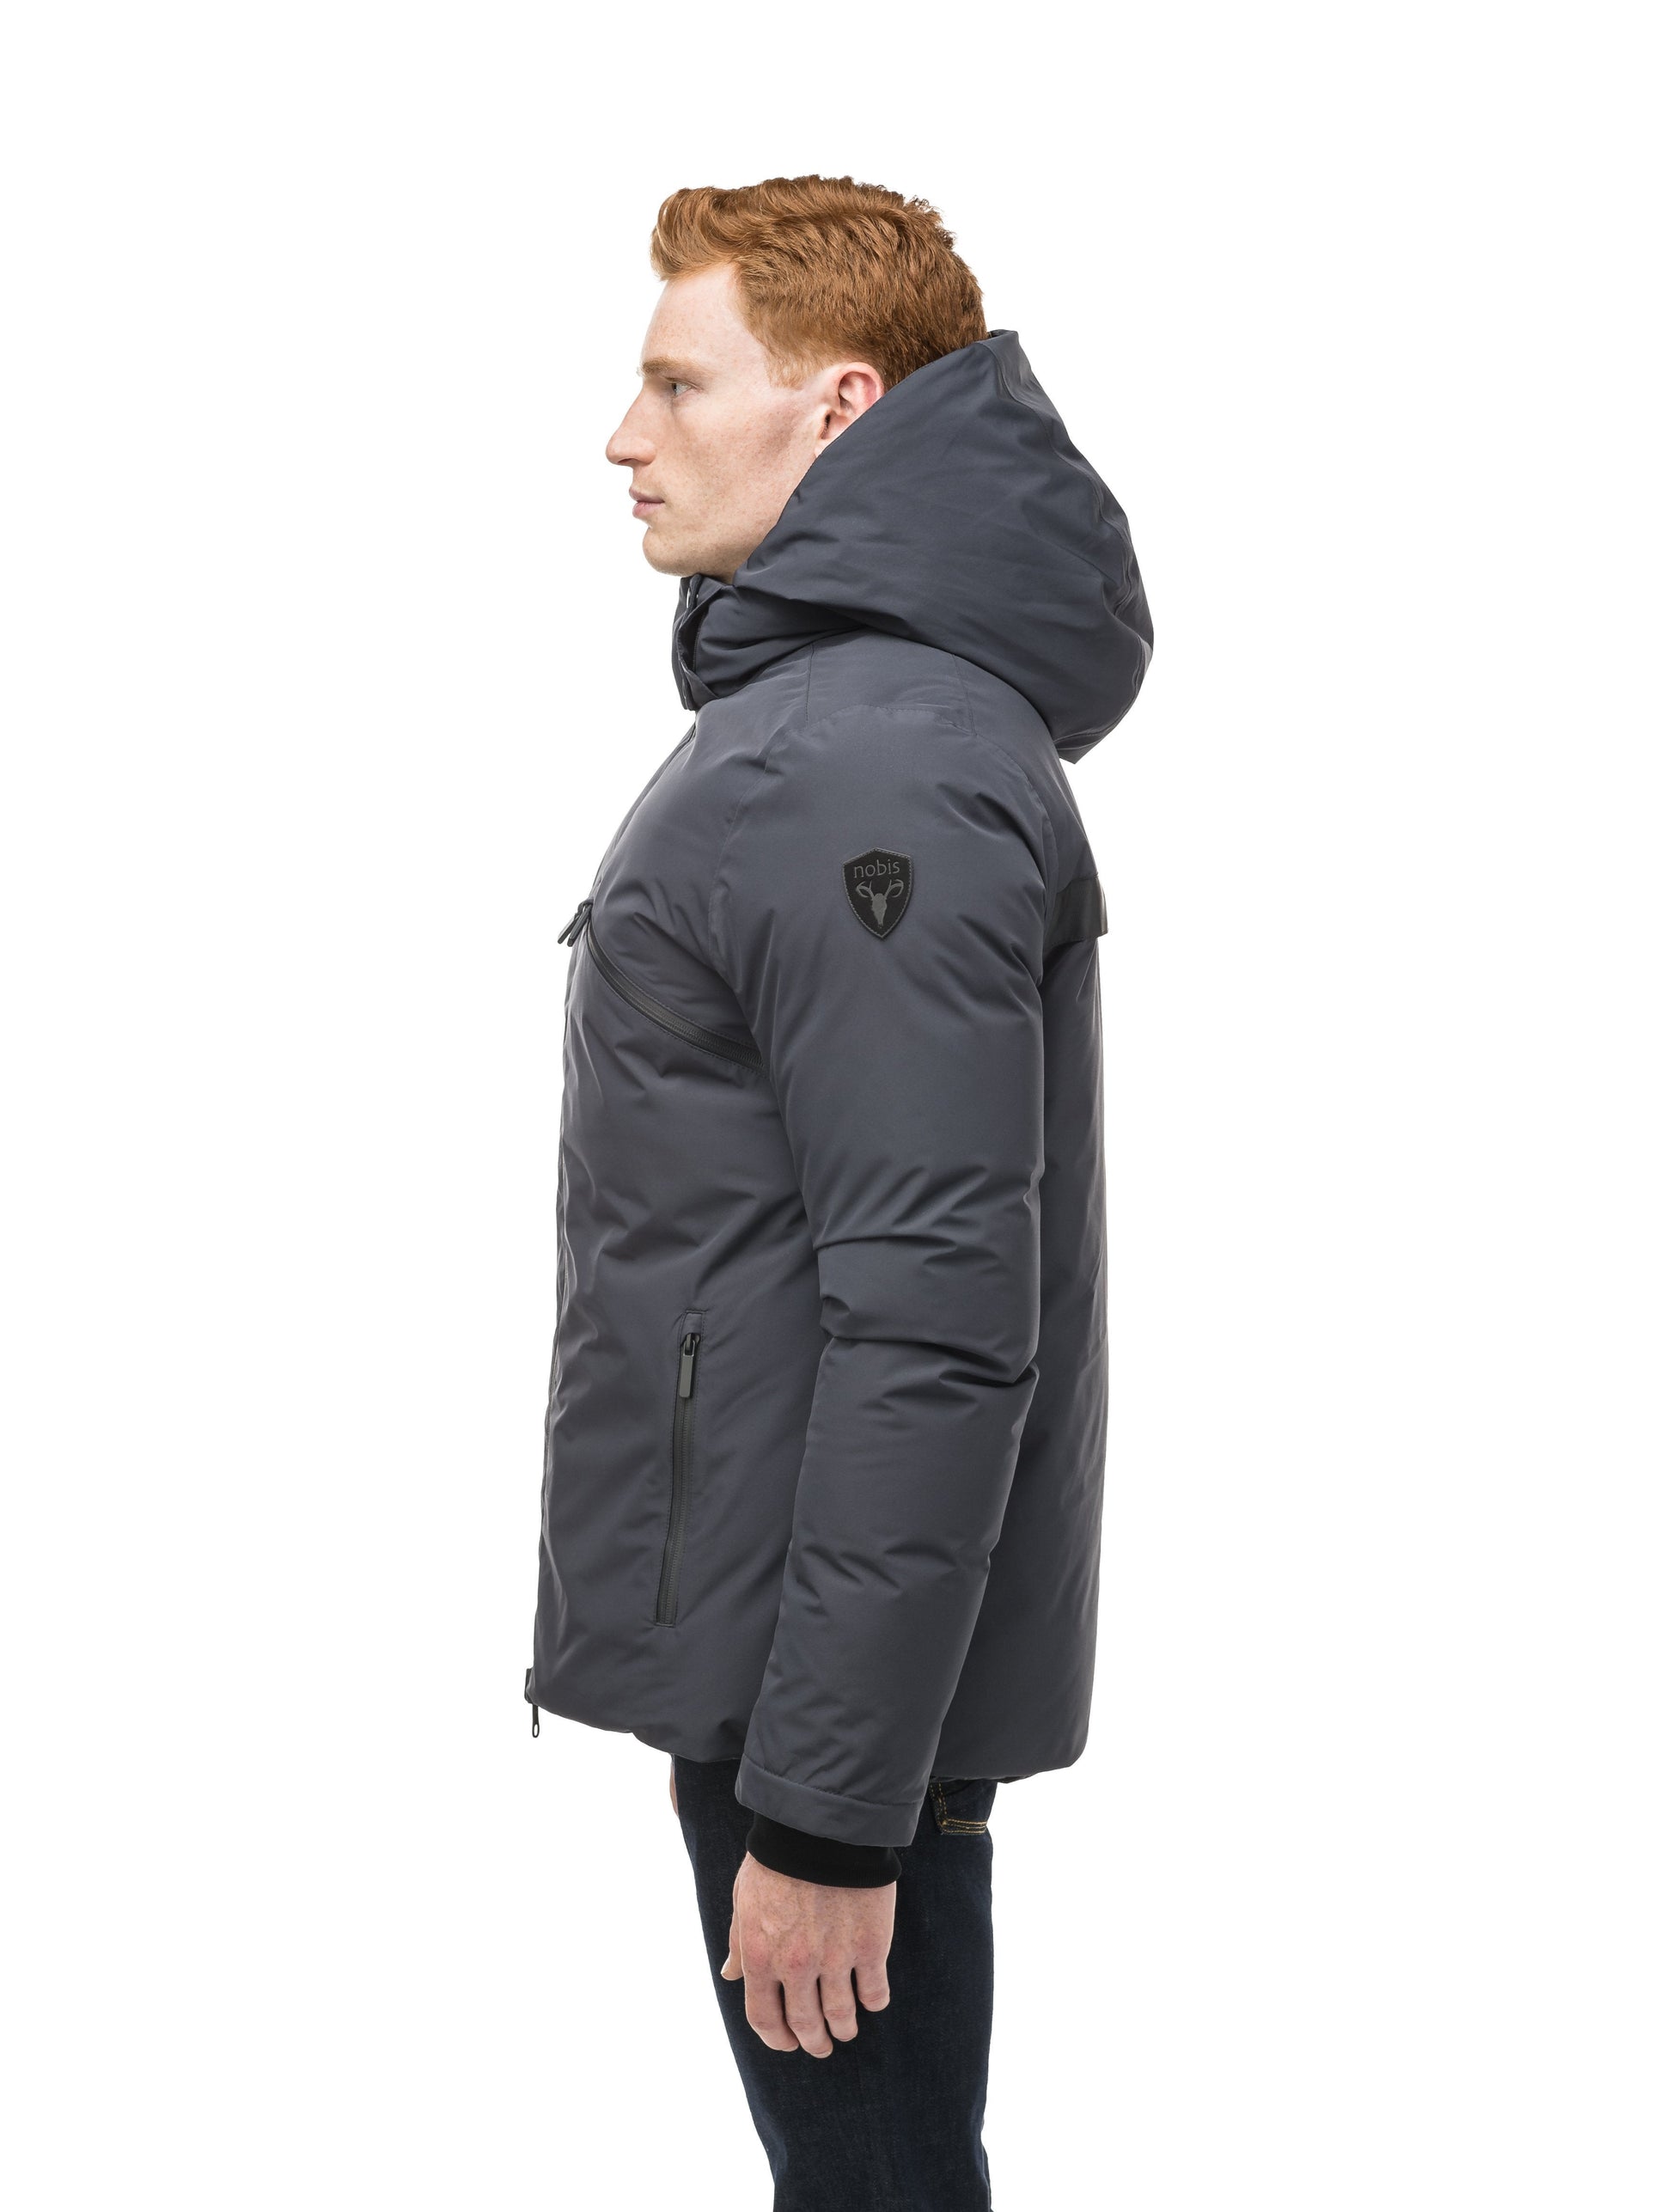 Hip length, reversible men's down filled jacket with removable hood in Marine